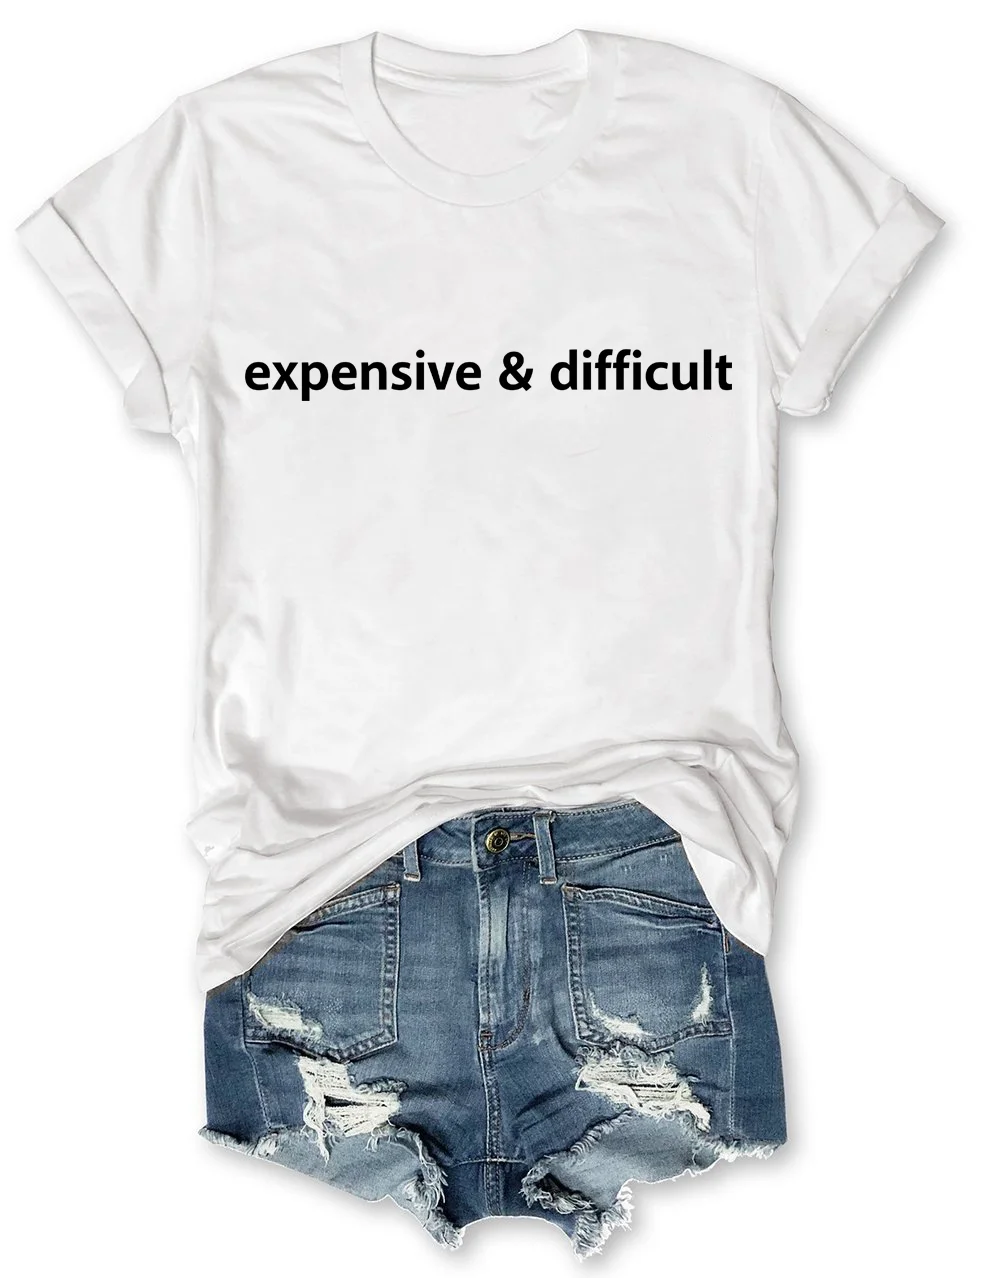 Expensive and Difficult T-Shirt